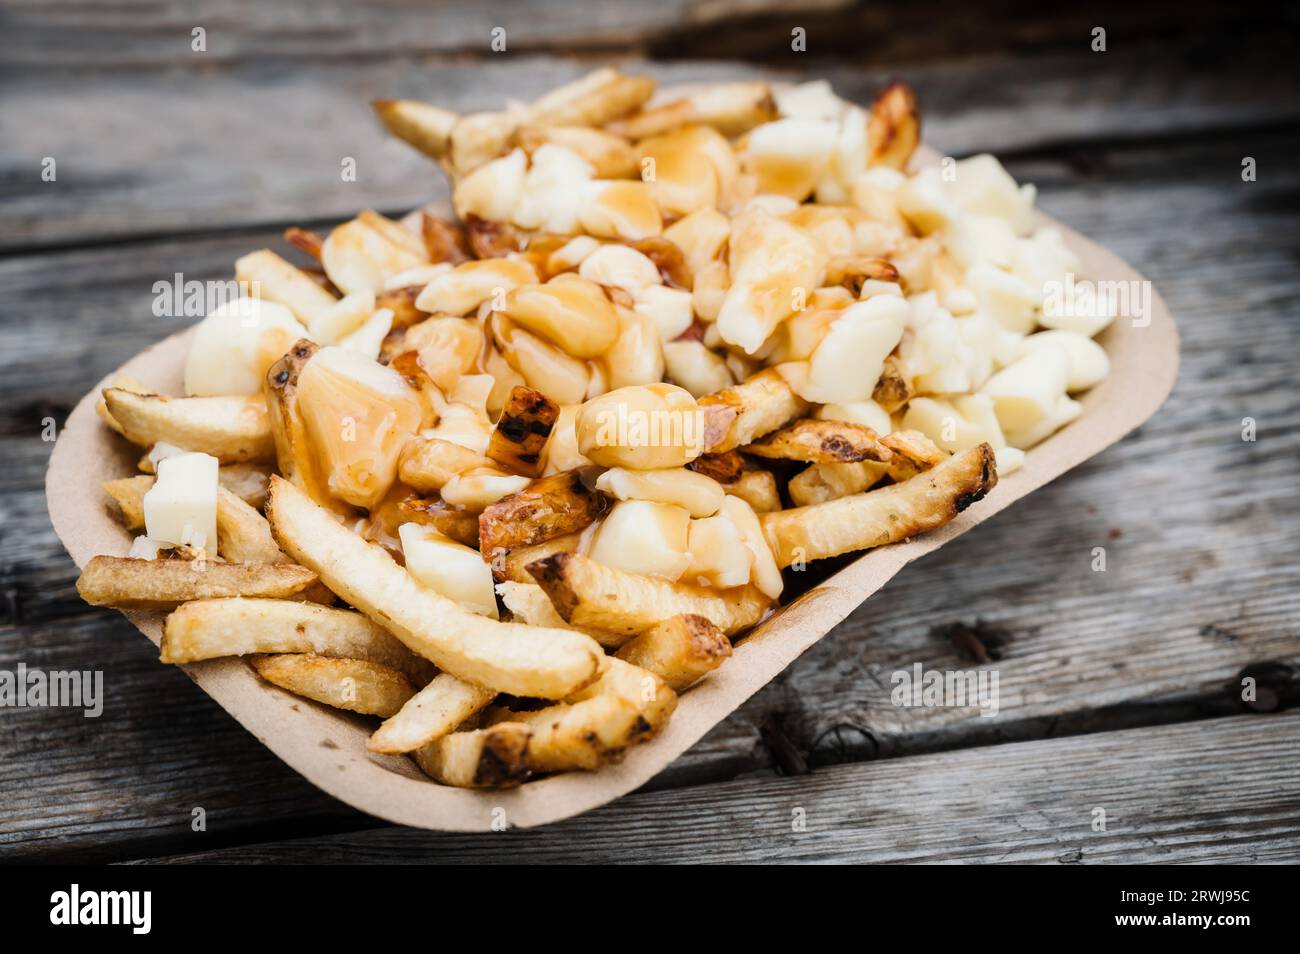 An order of poutine, a French Canadian dish of French fries, gravy, and cheese curds, at a stake street food stand. Stock Photo